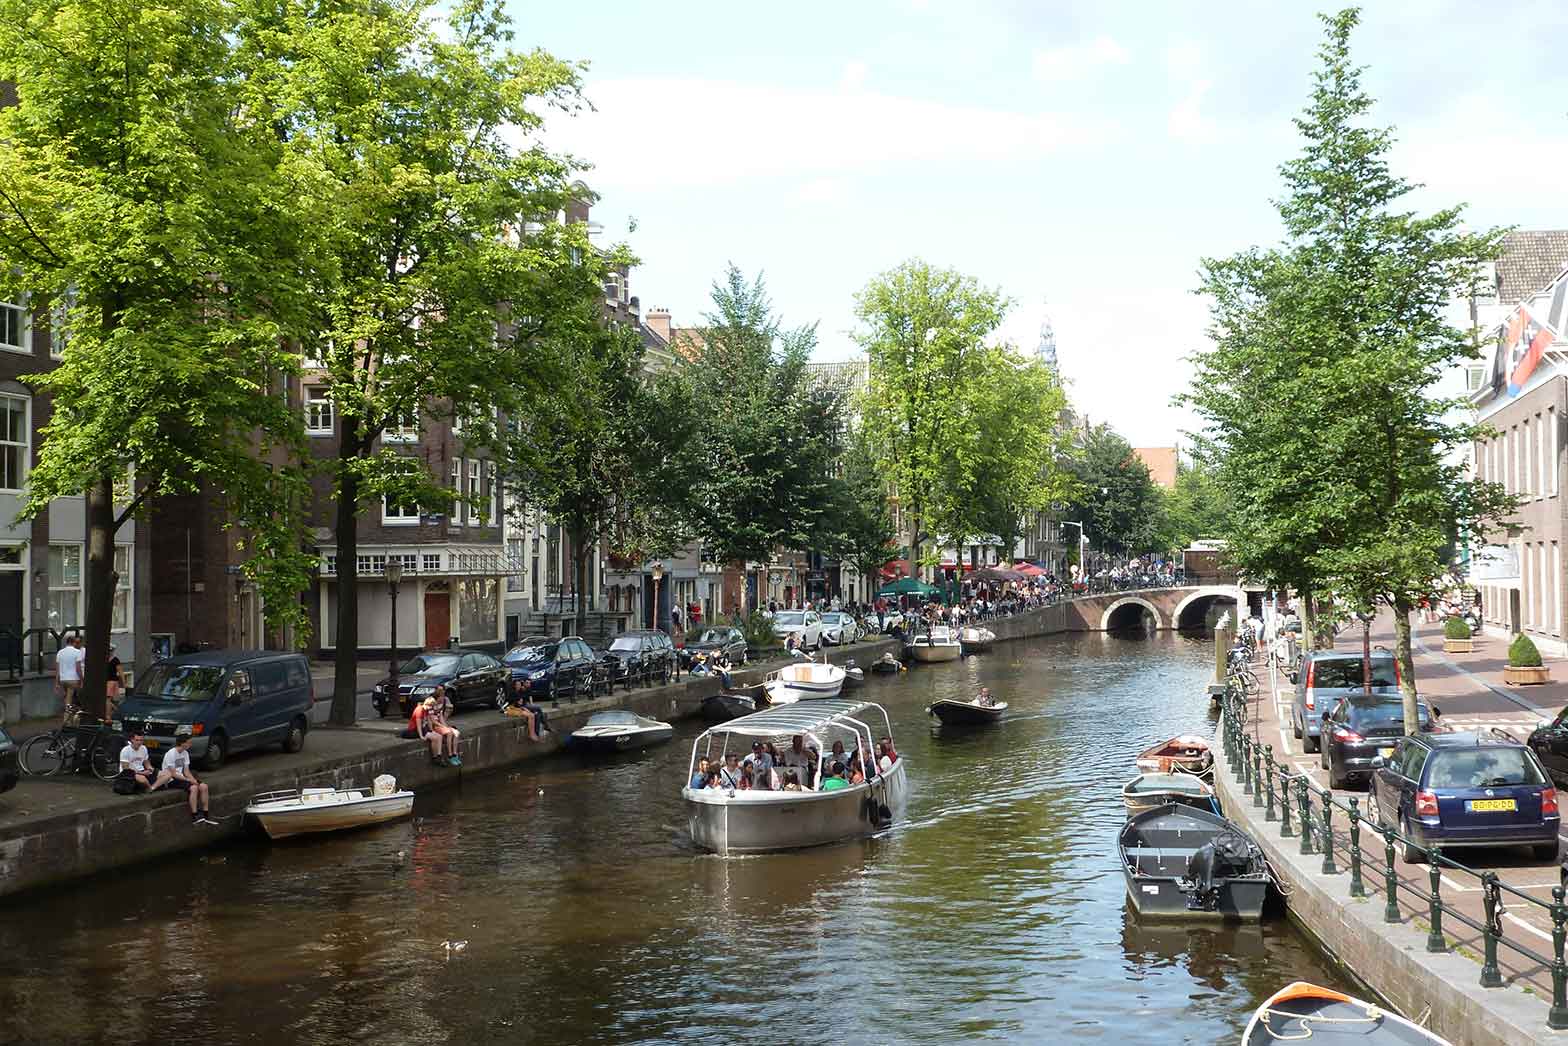 Canals of Amsterdam, the Netherlands